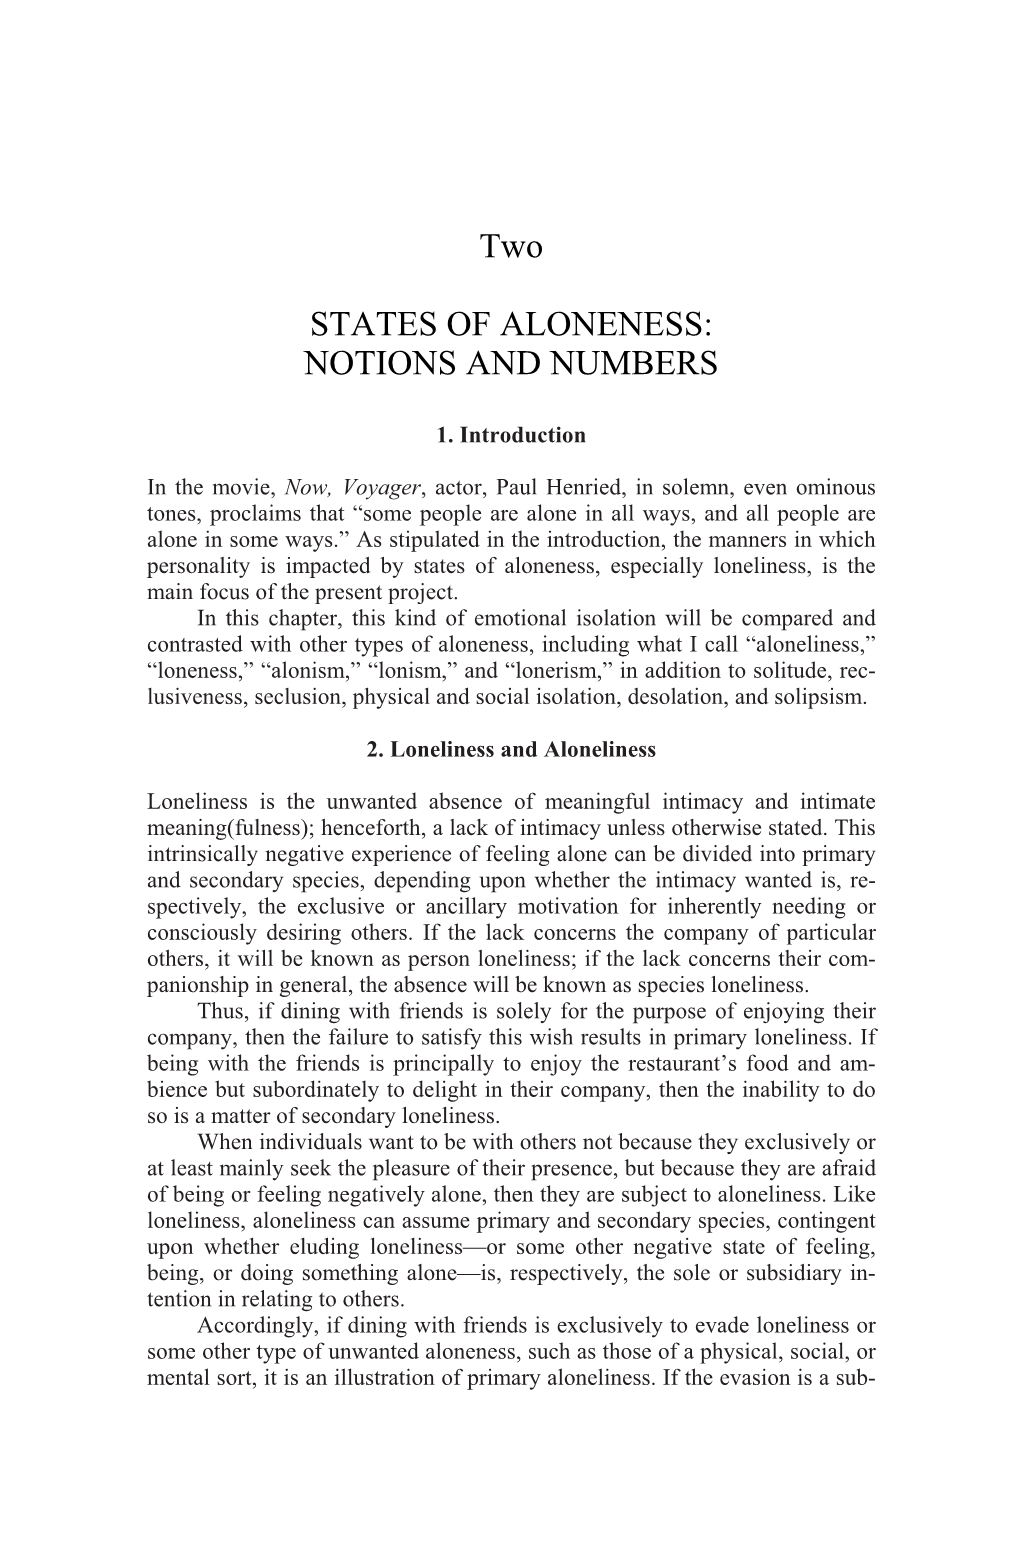 Two STATES of ALONENESS